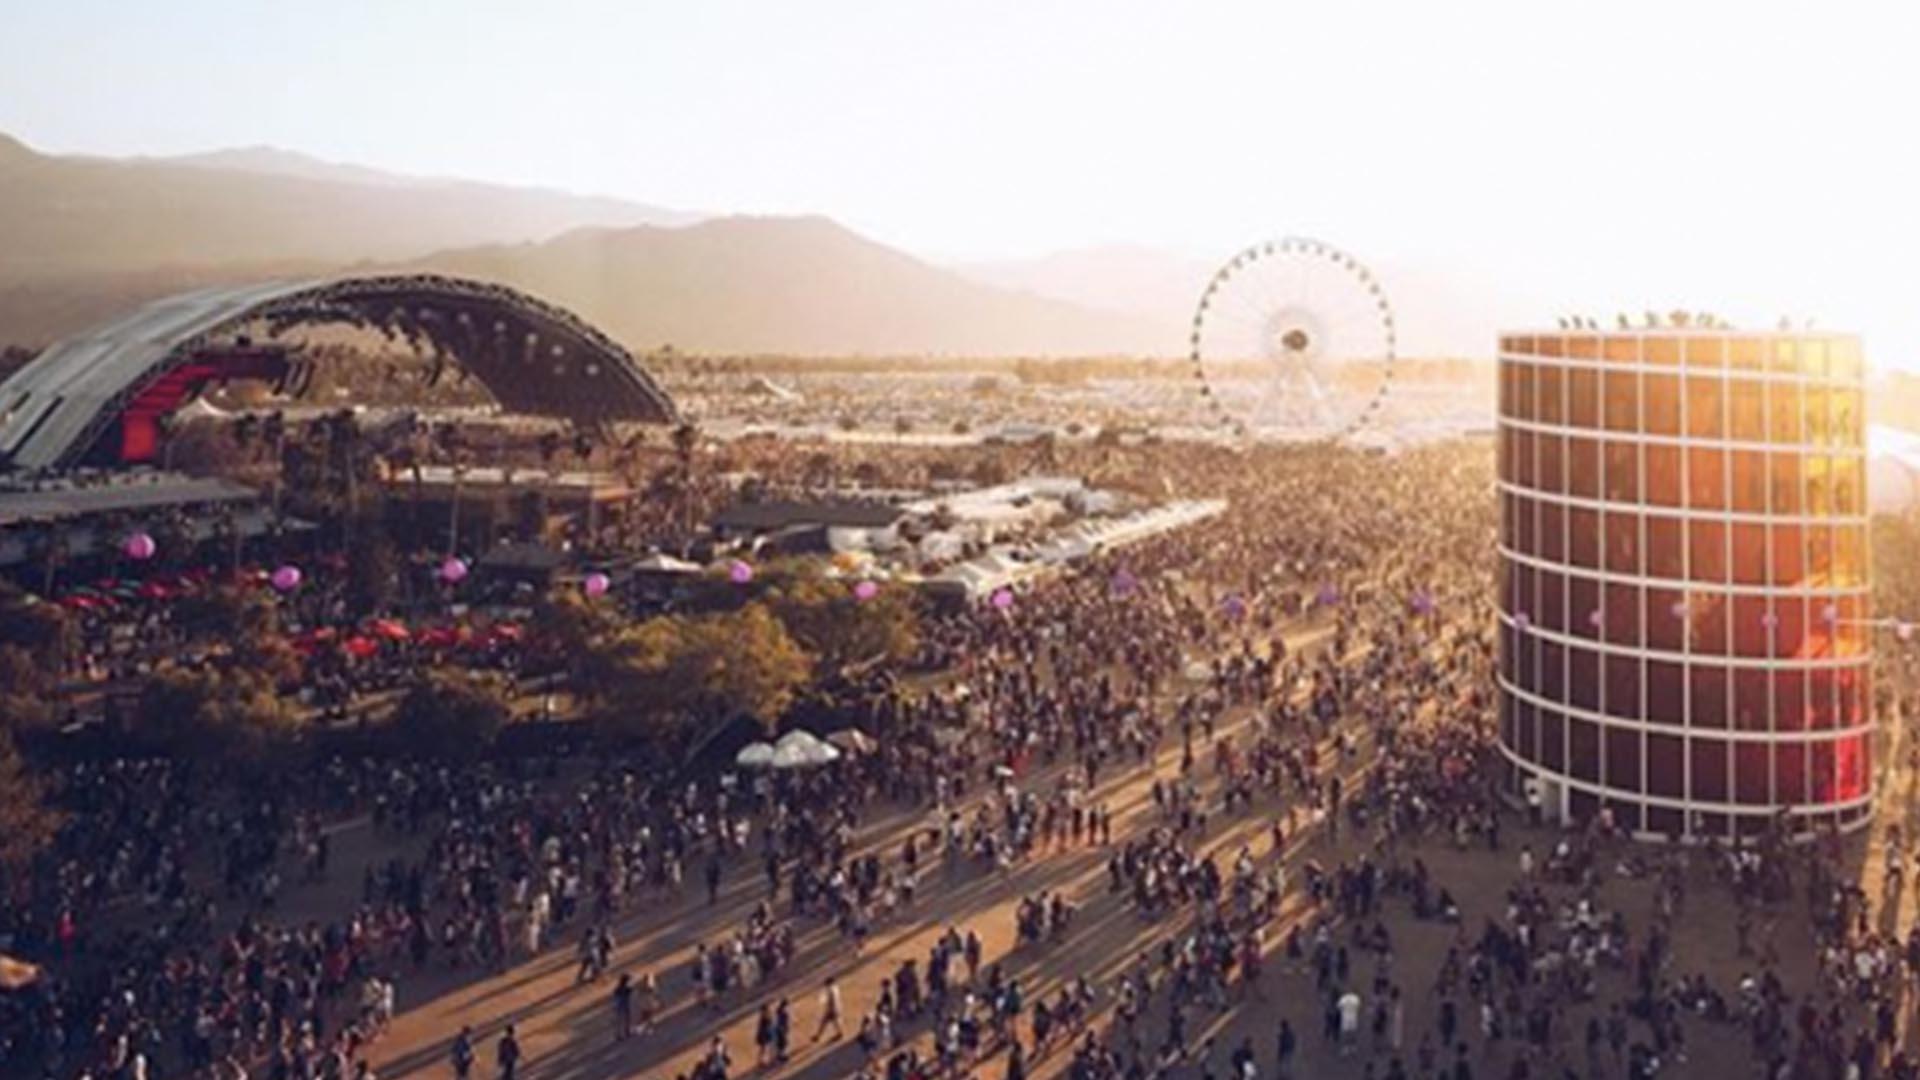 Advance Passes For Coachella 2020 Already Sold Out